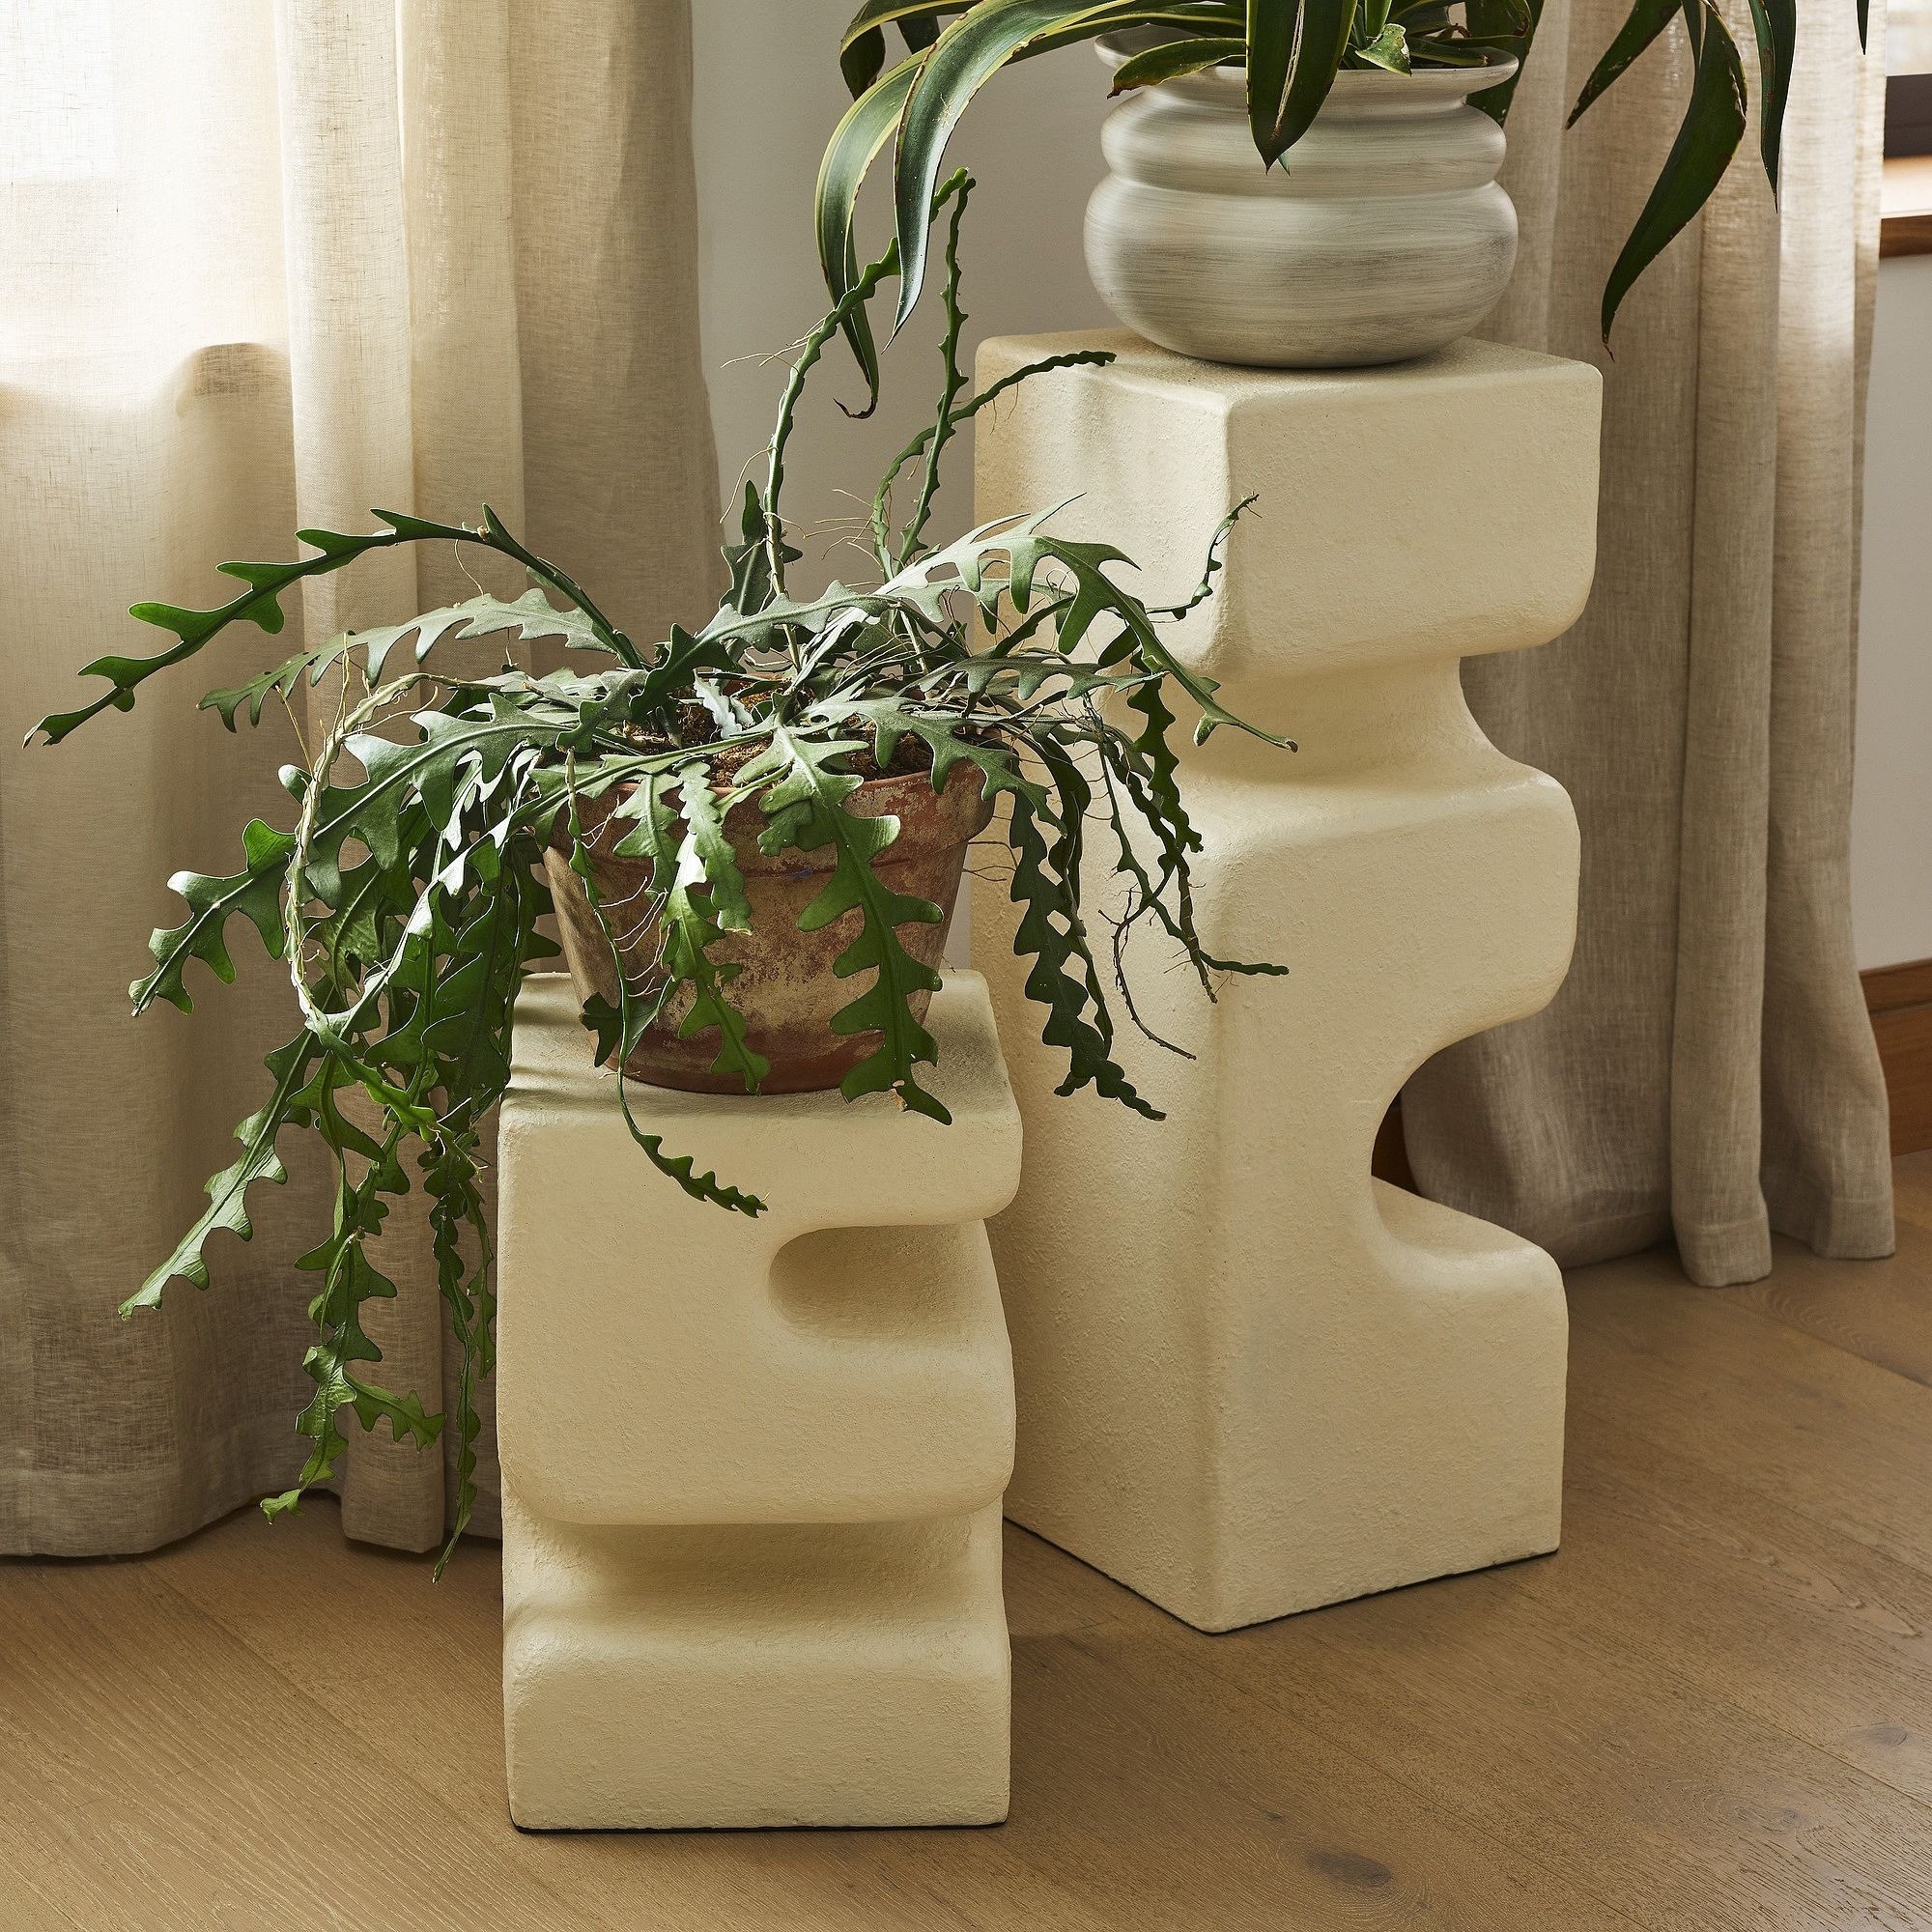 Two unique sculptural bookends holding a potted plant on a wooden floor, ideal for stylish interior decor